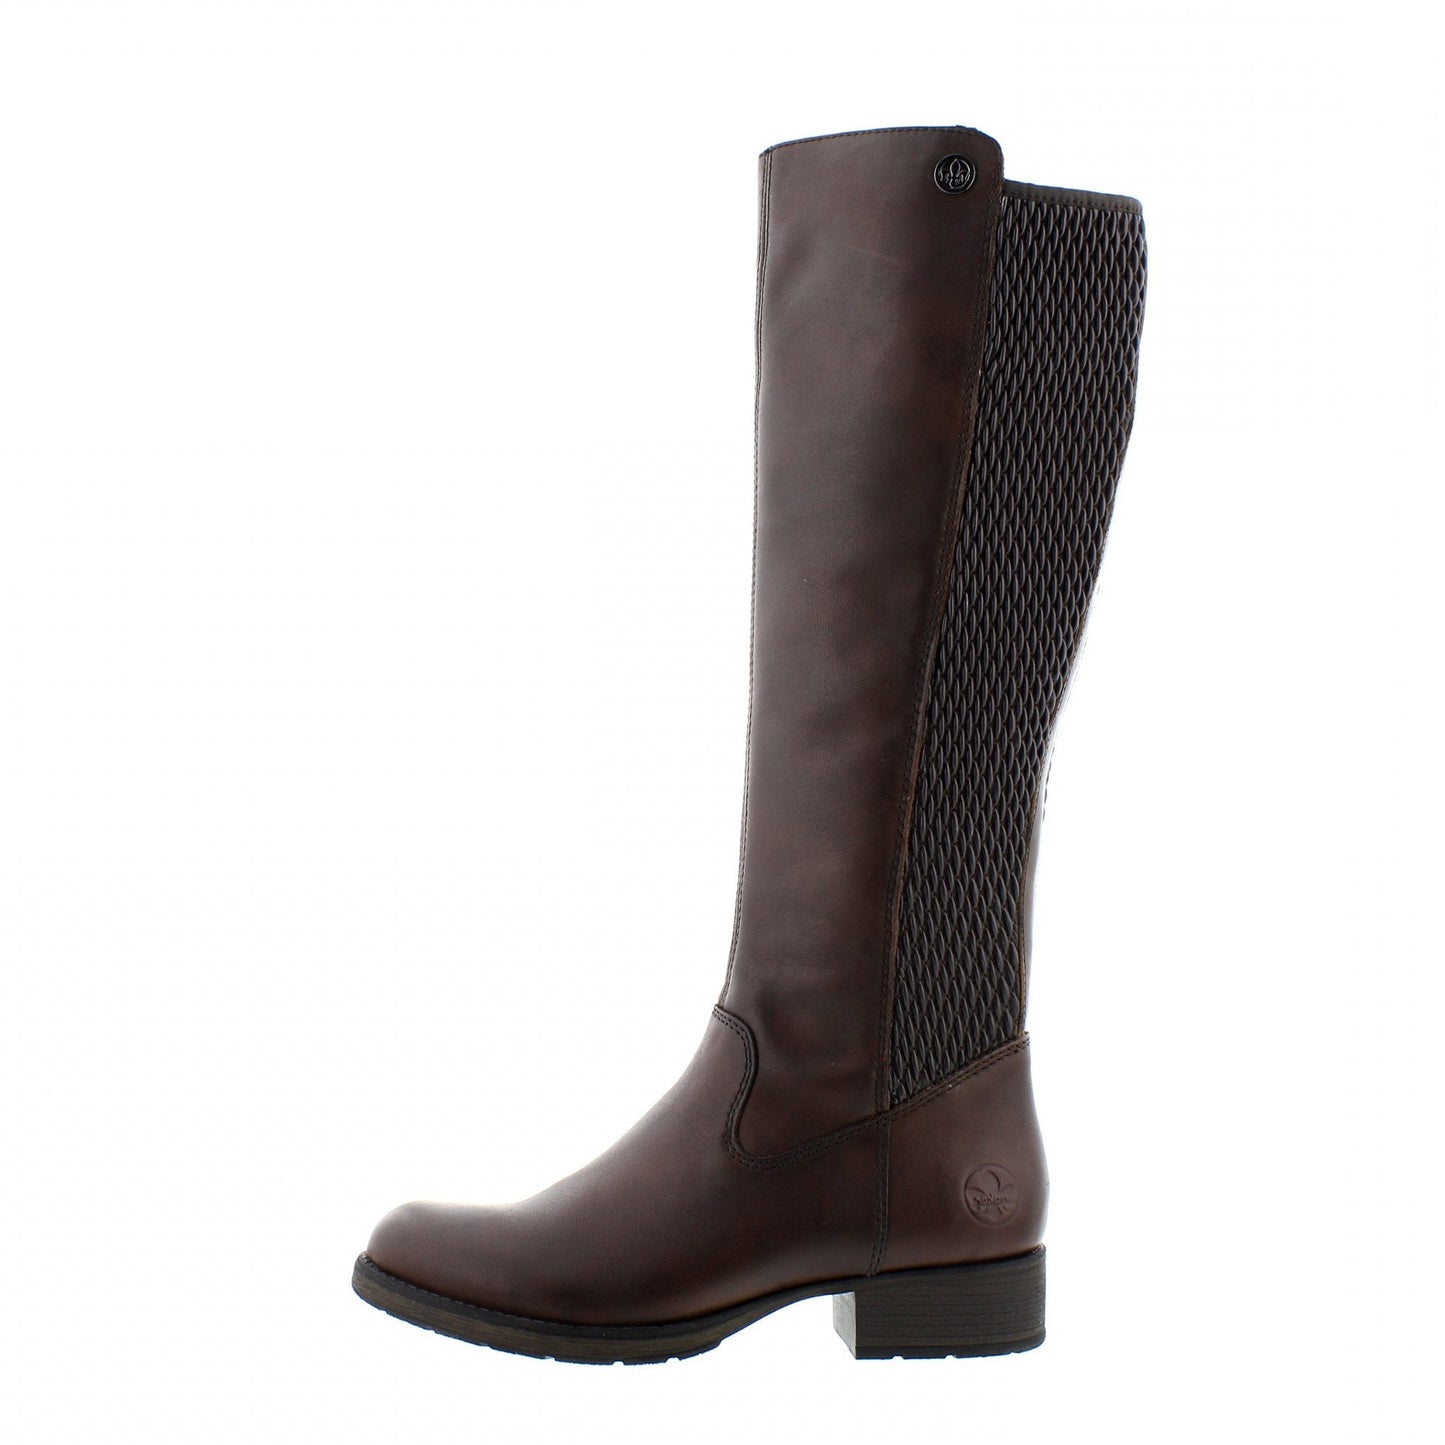 Z9591-26 Brown (size 36) - ONLINE ONLY